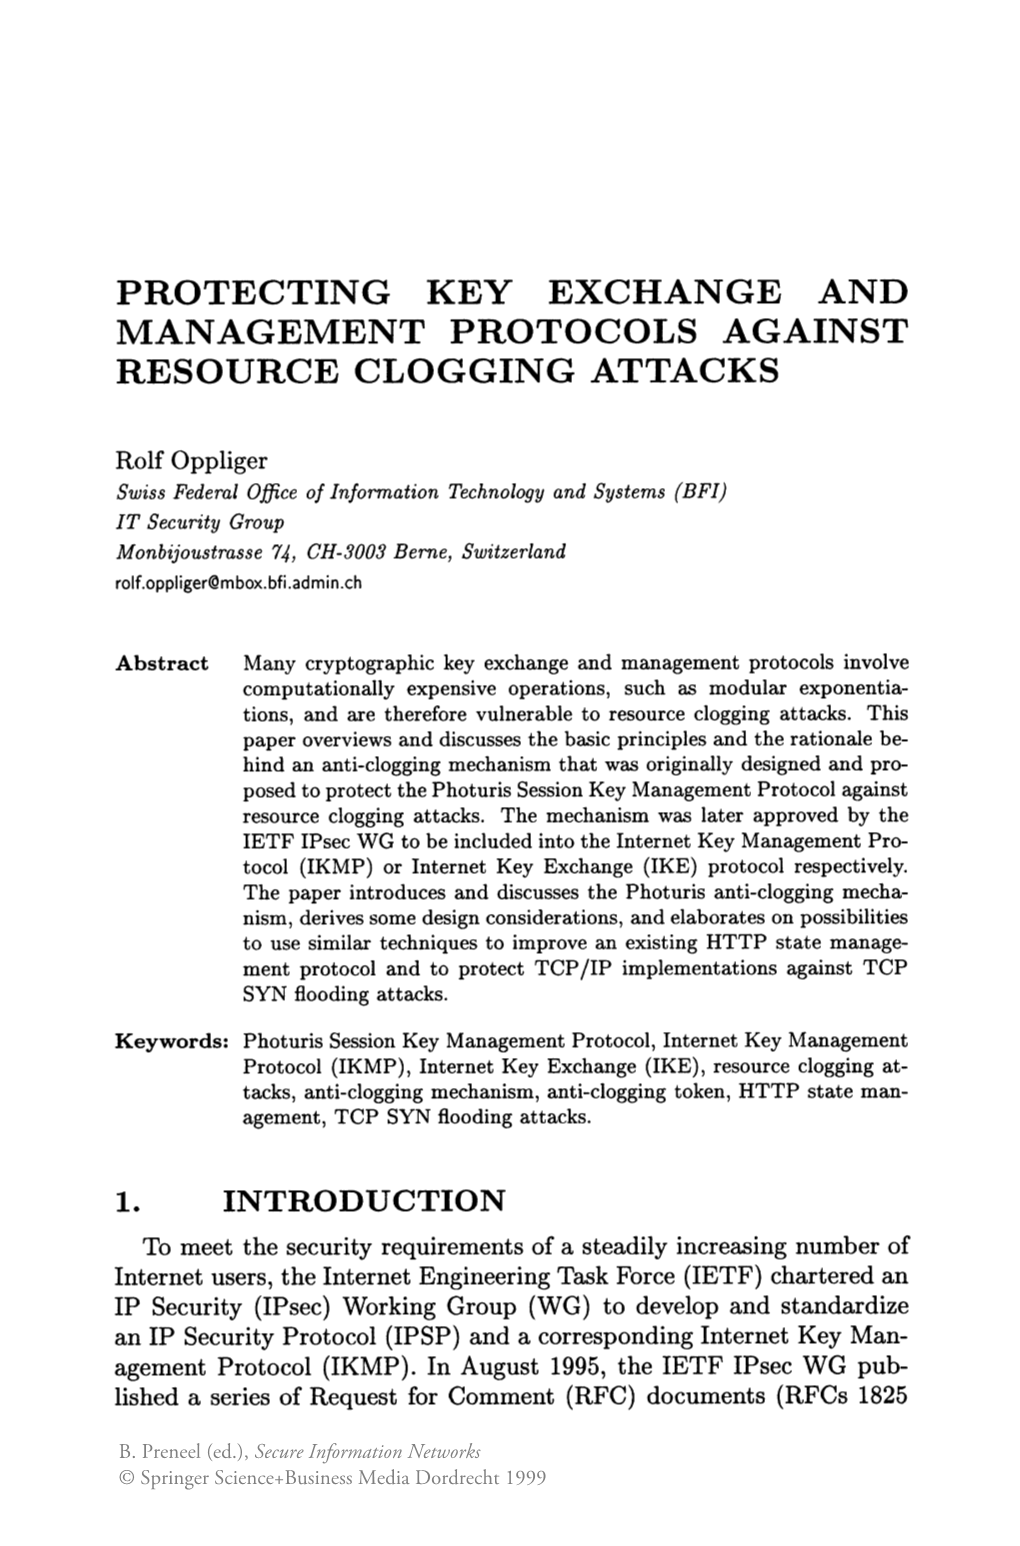 Protecting Key Exchange and Management Protocols Against Resource Clogging Attacks